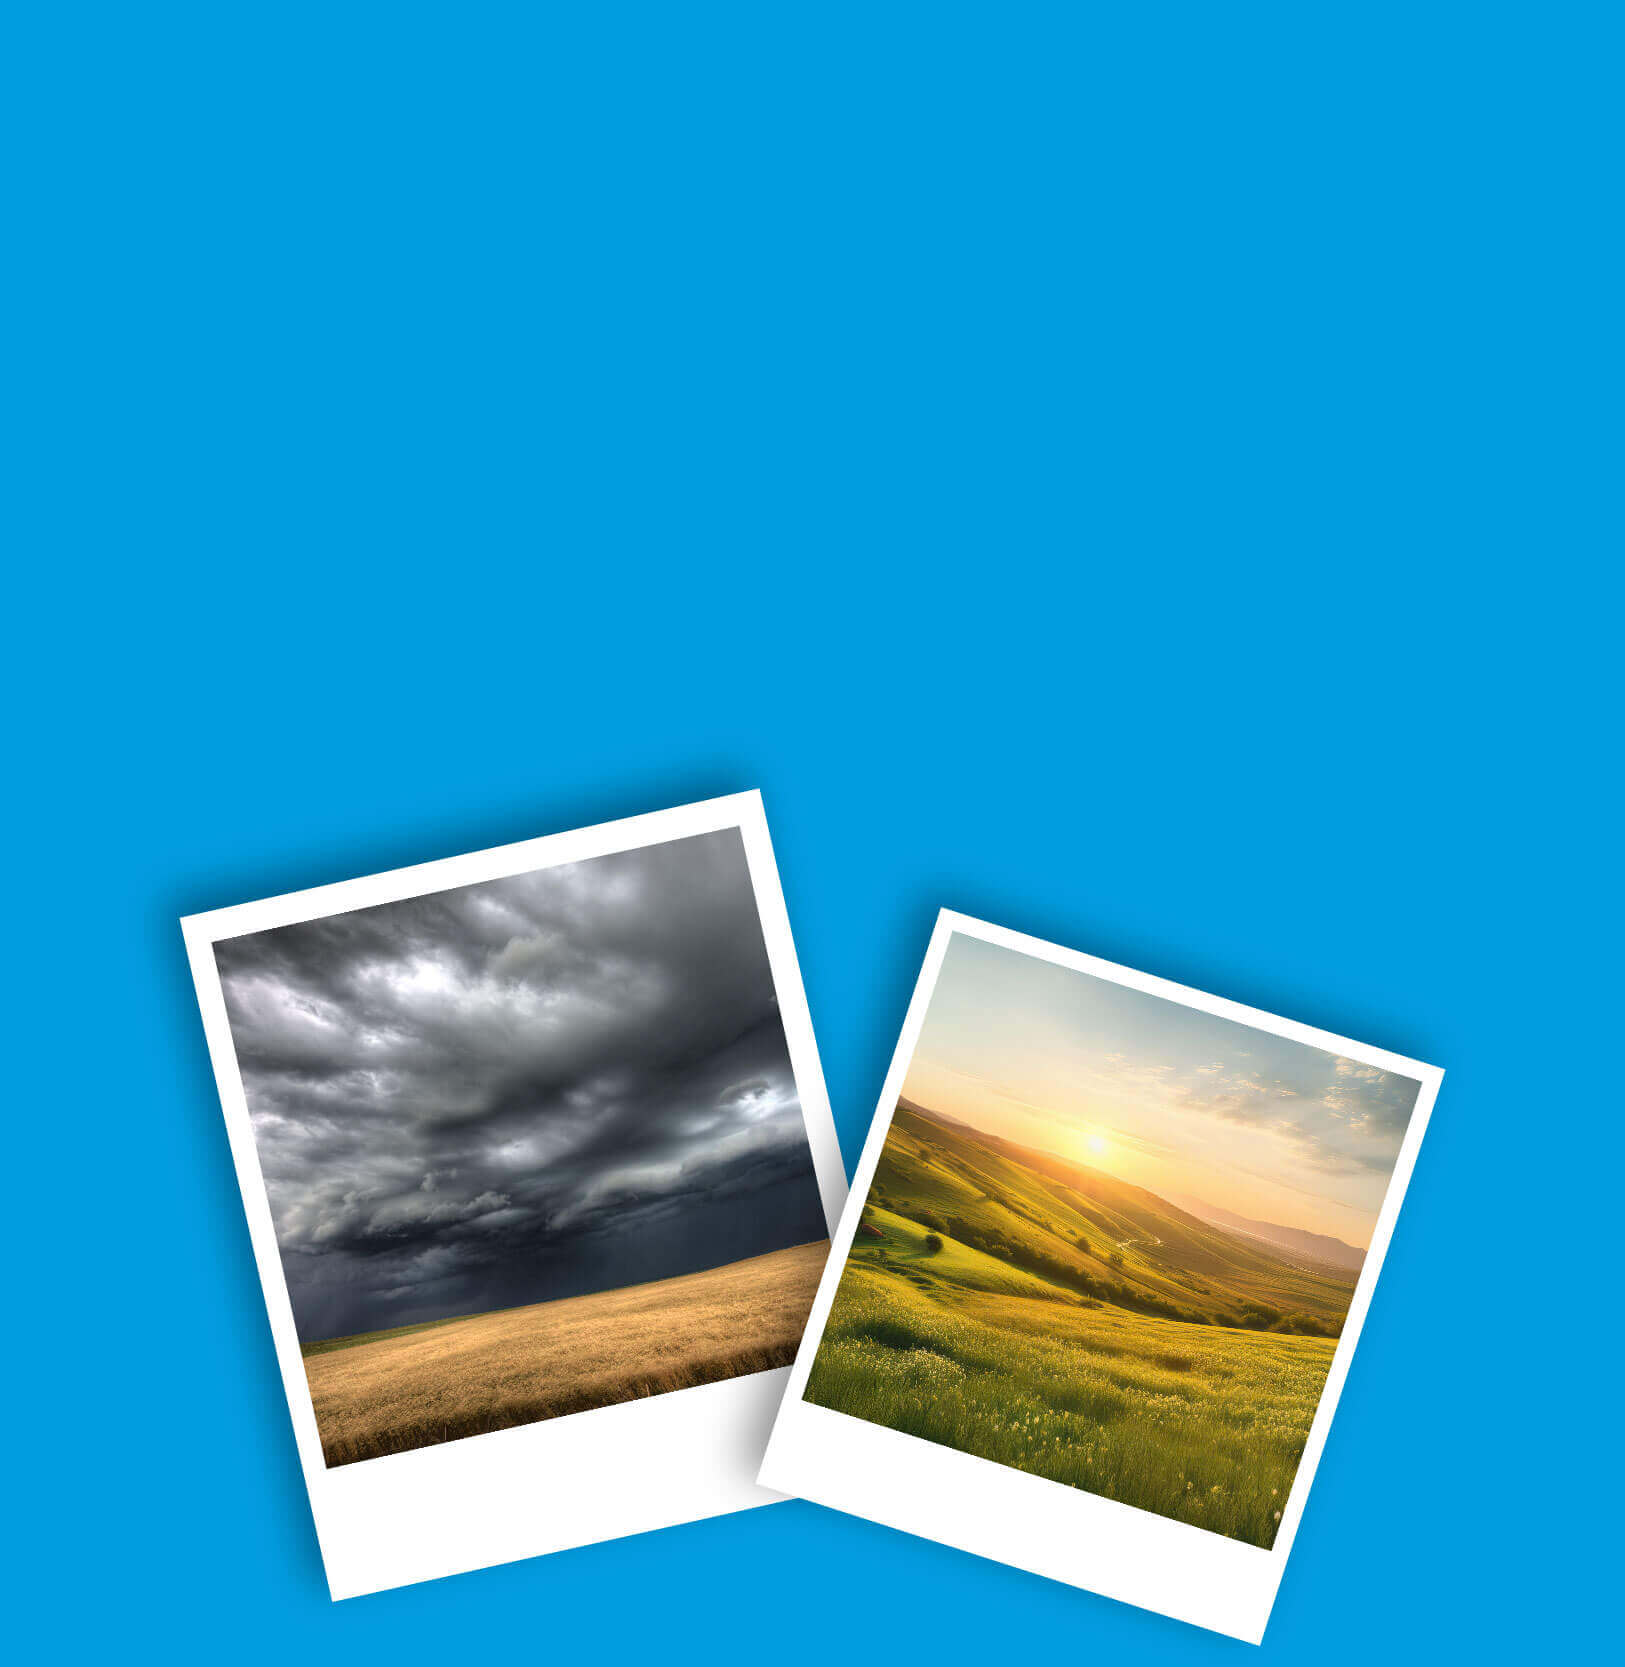 Scenic photos of storms and fields.